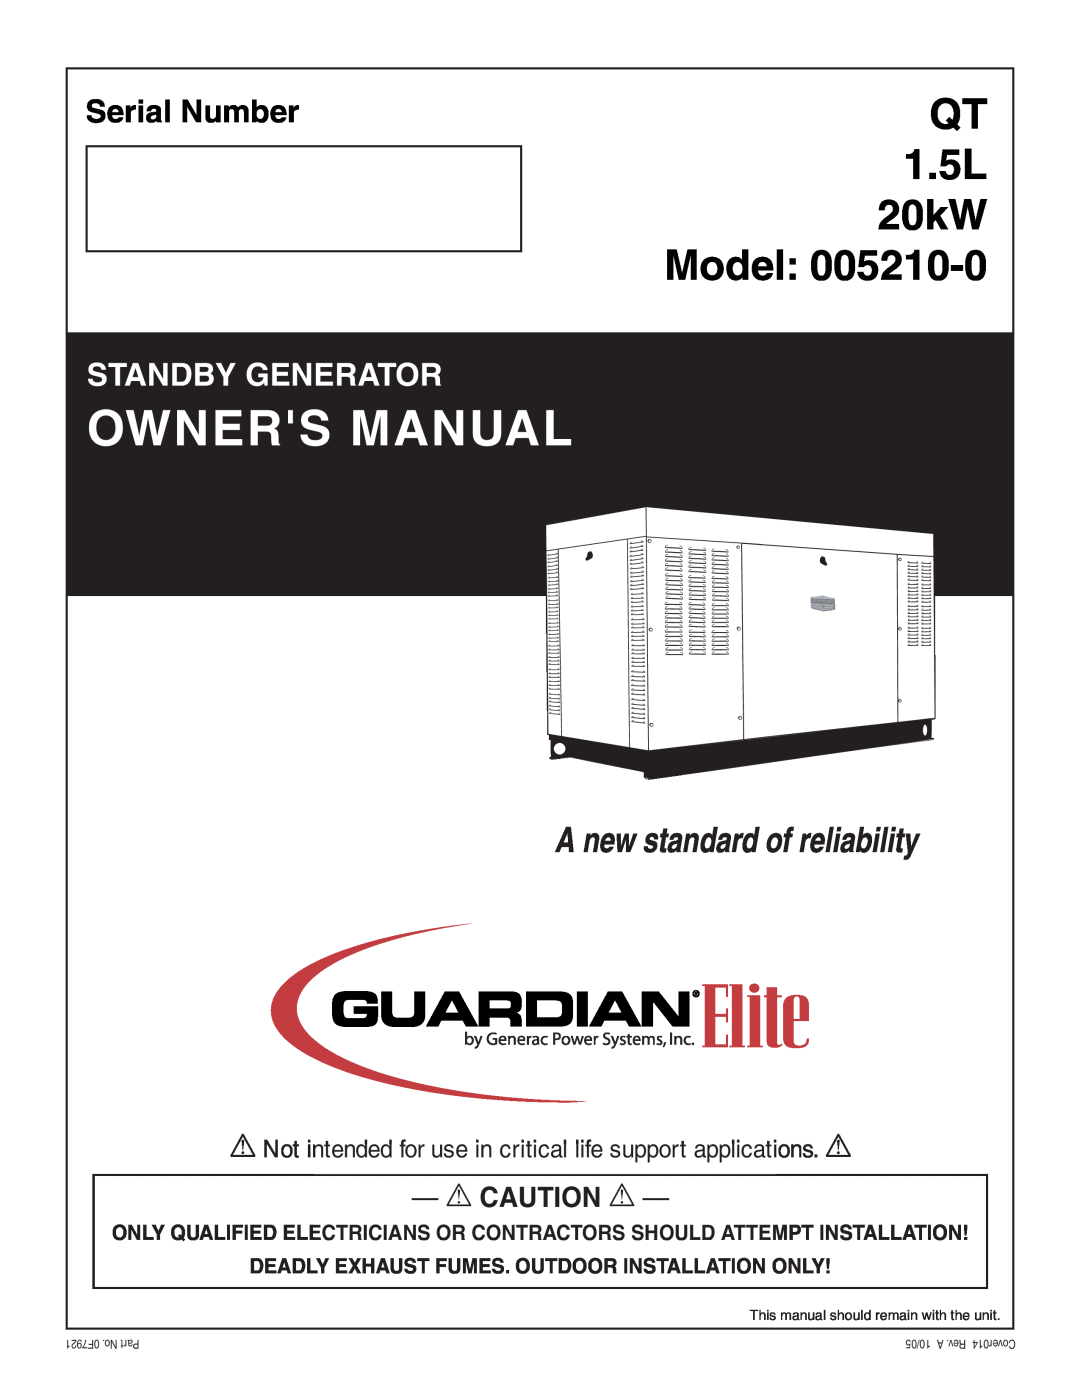 Generac Power Systems 005210-0 owner manual Deadly Exhaust Fumes. Outdoor Installation Only, Model, QT 1.5L 20kW 